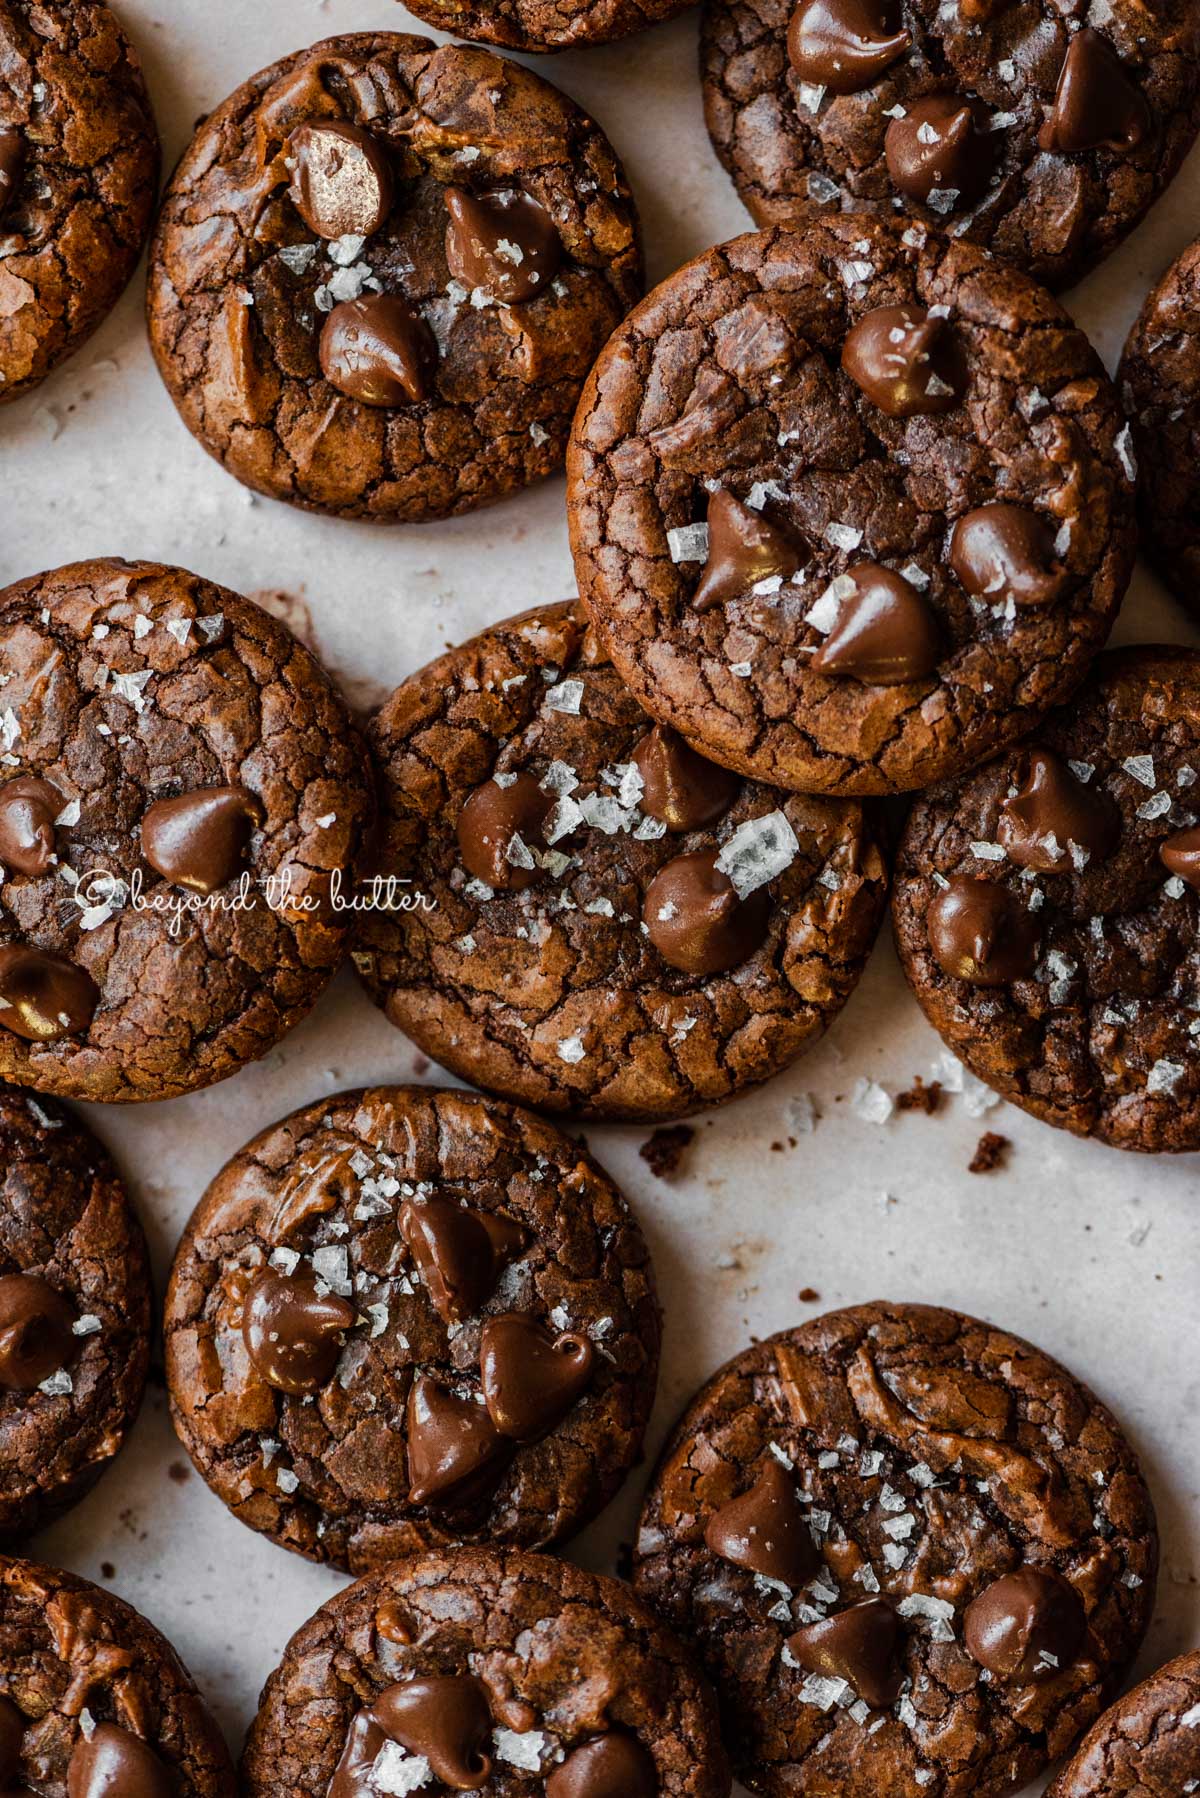 Salted brownie cookies on abstract light brown background | All Images © Beyond the Butter®